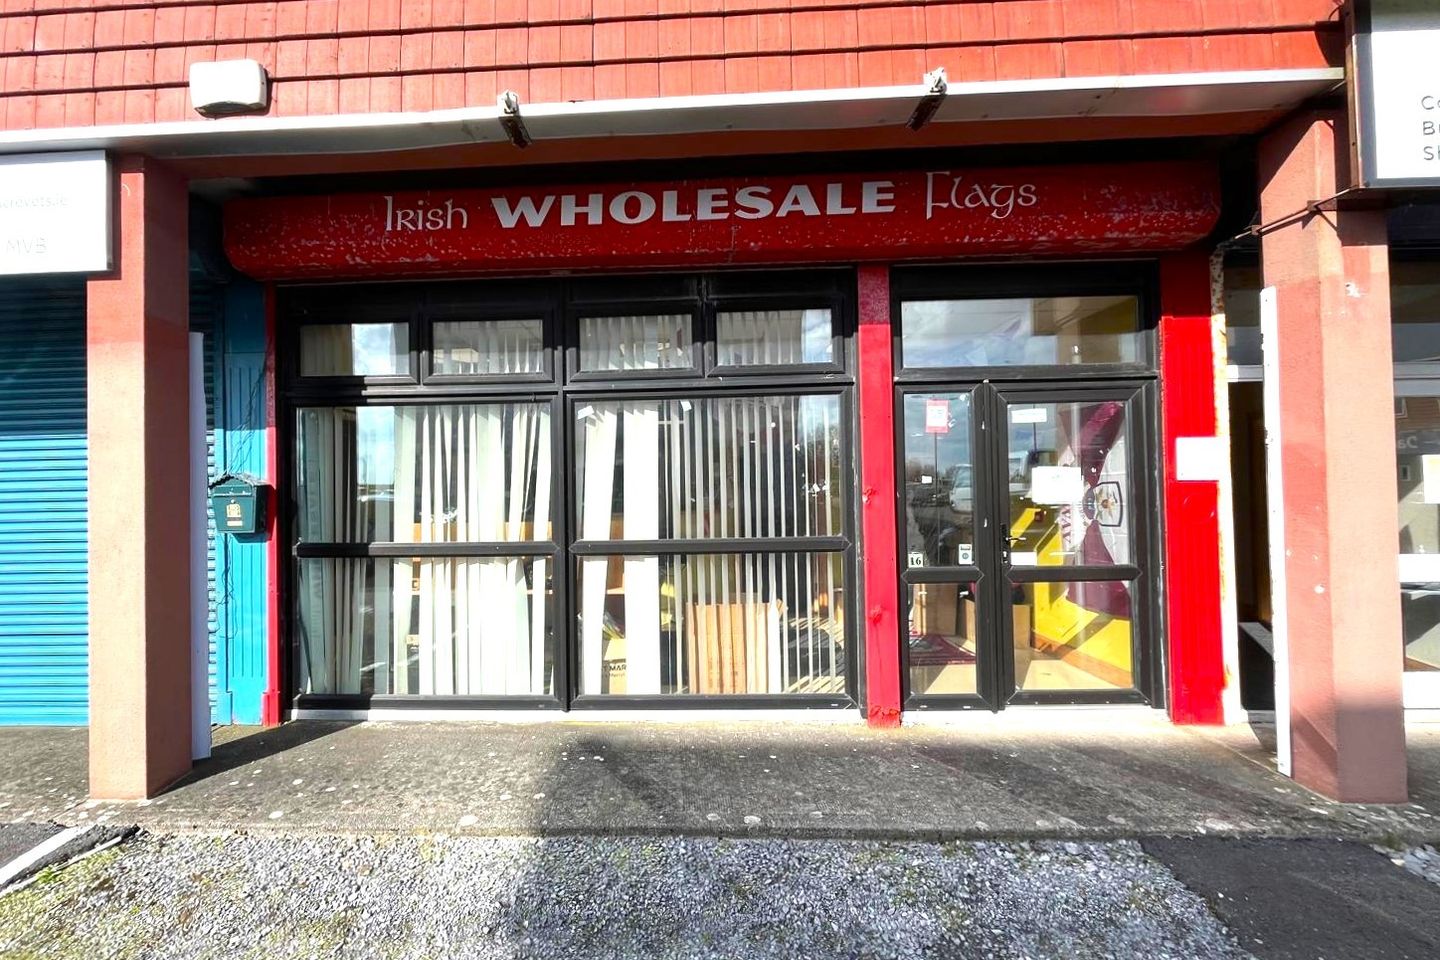 Units 16 and 17 N17 Business Park, Tuam, Co. Galway